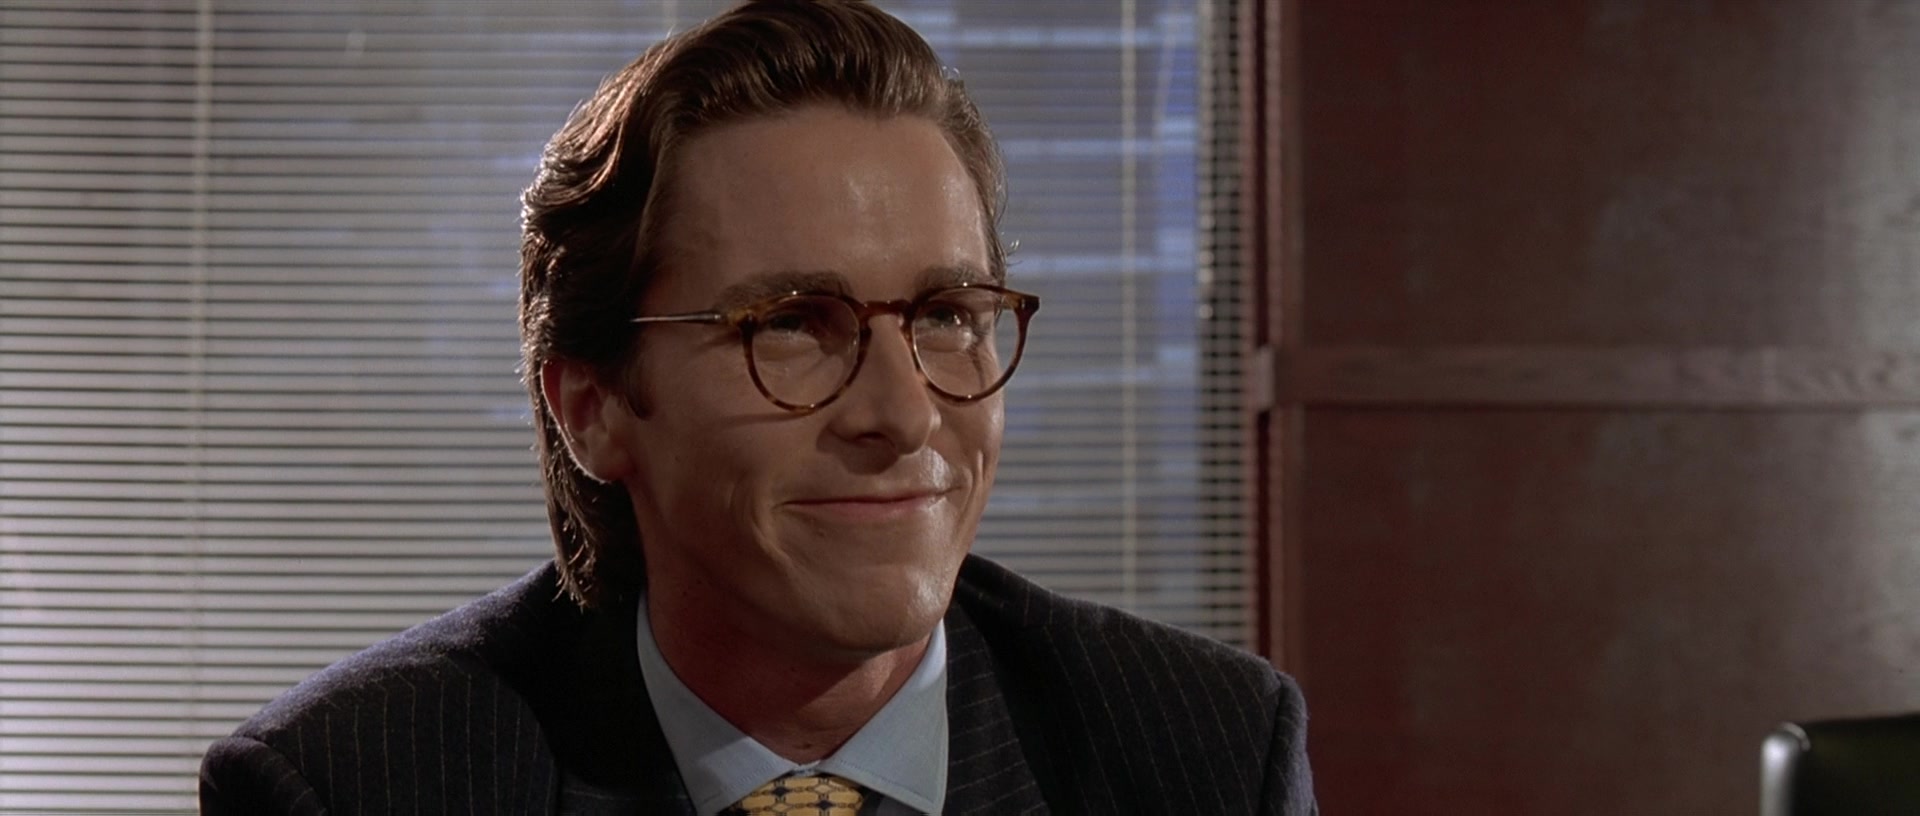 Oliver Peoples Glasses Worn by Christian Bale as Patrick Bateman in America...